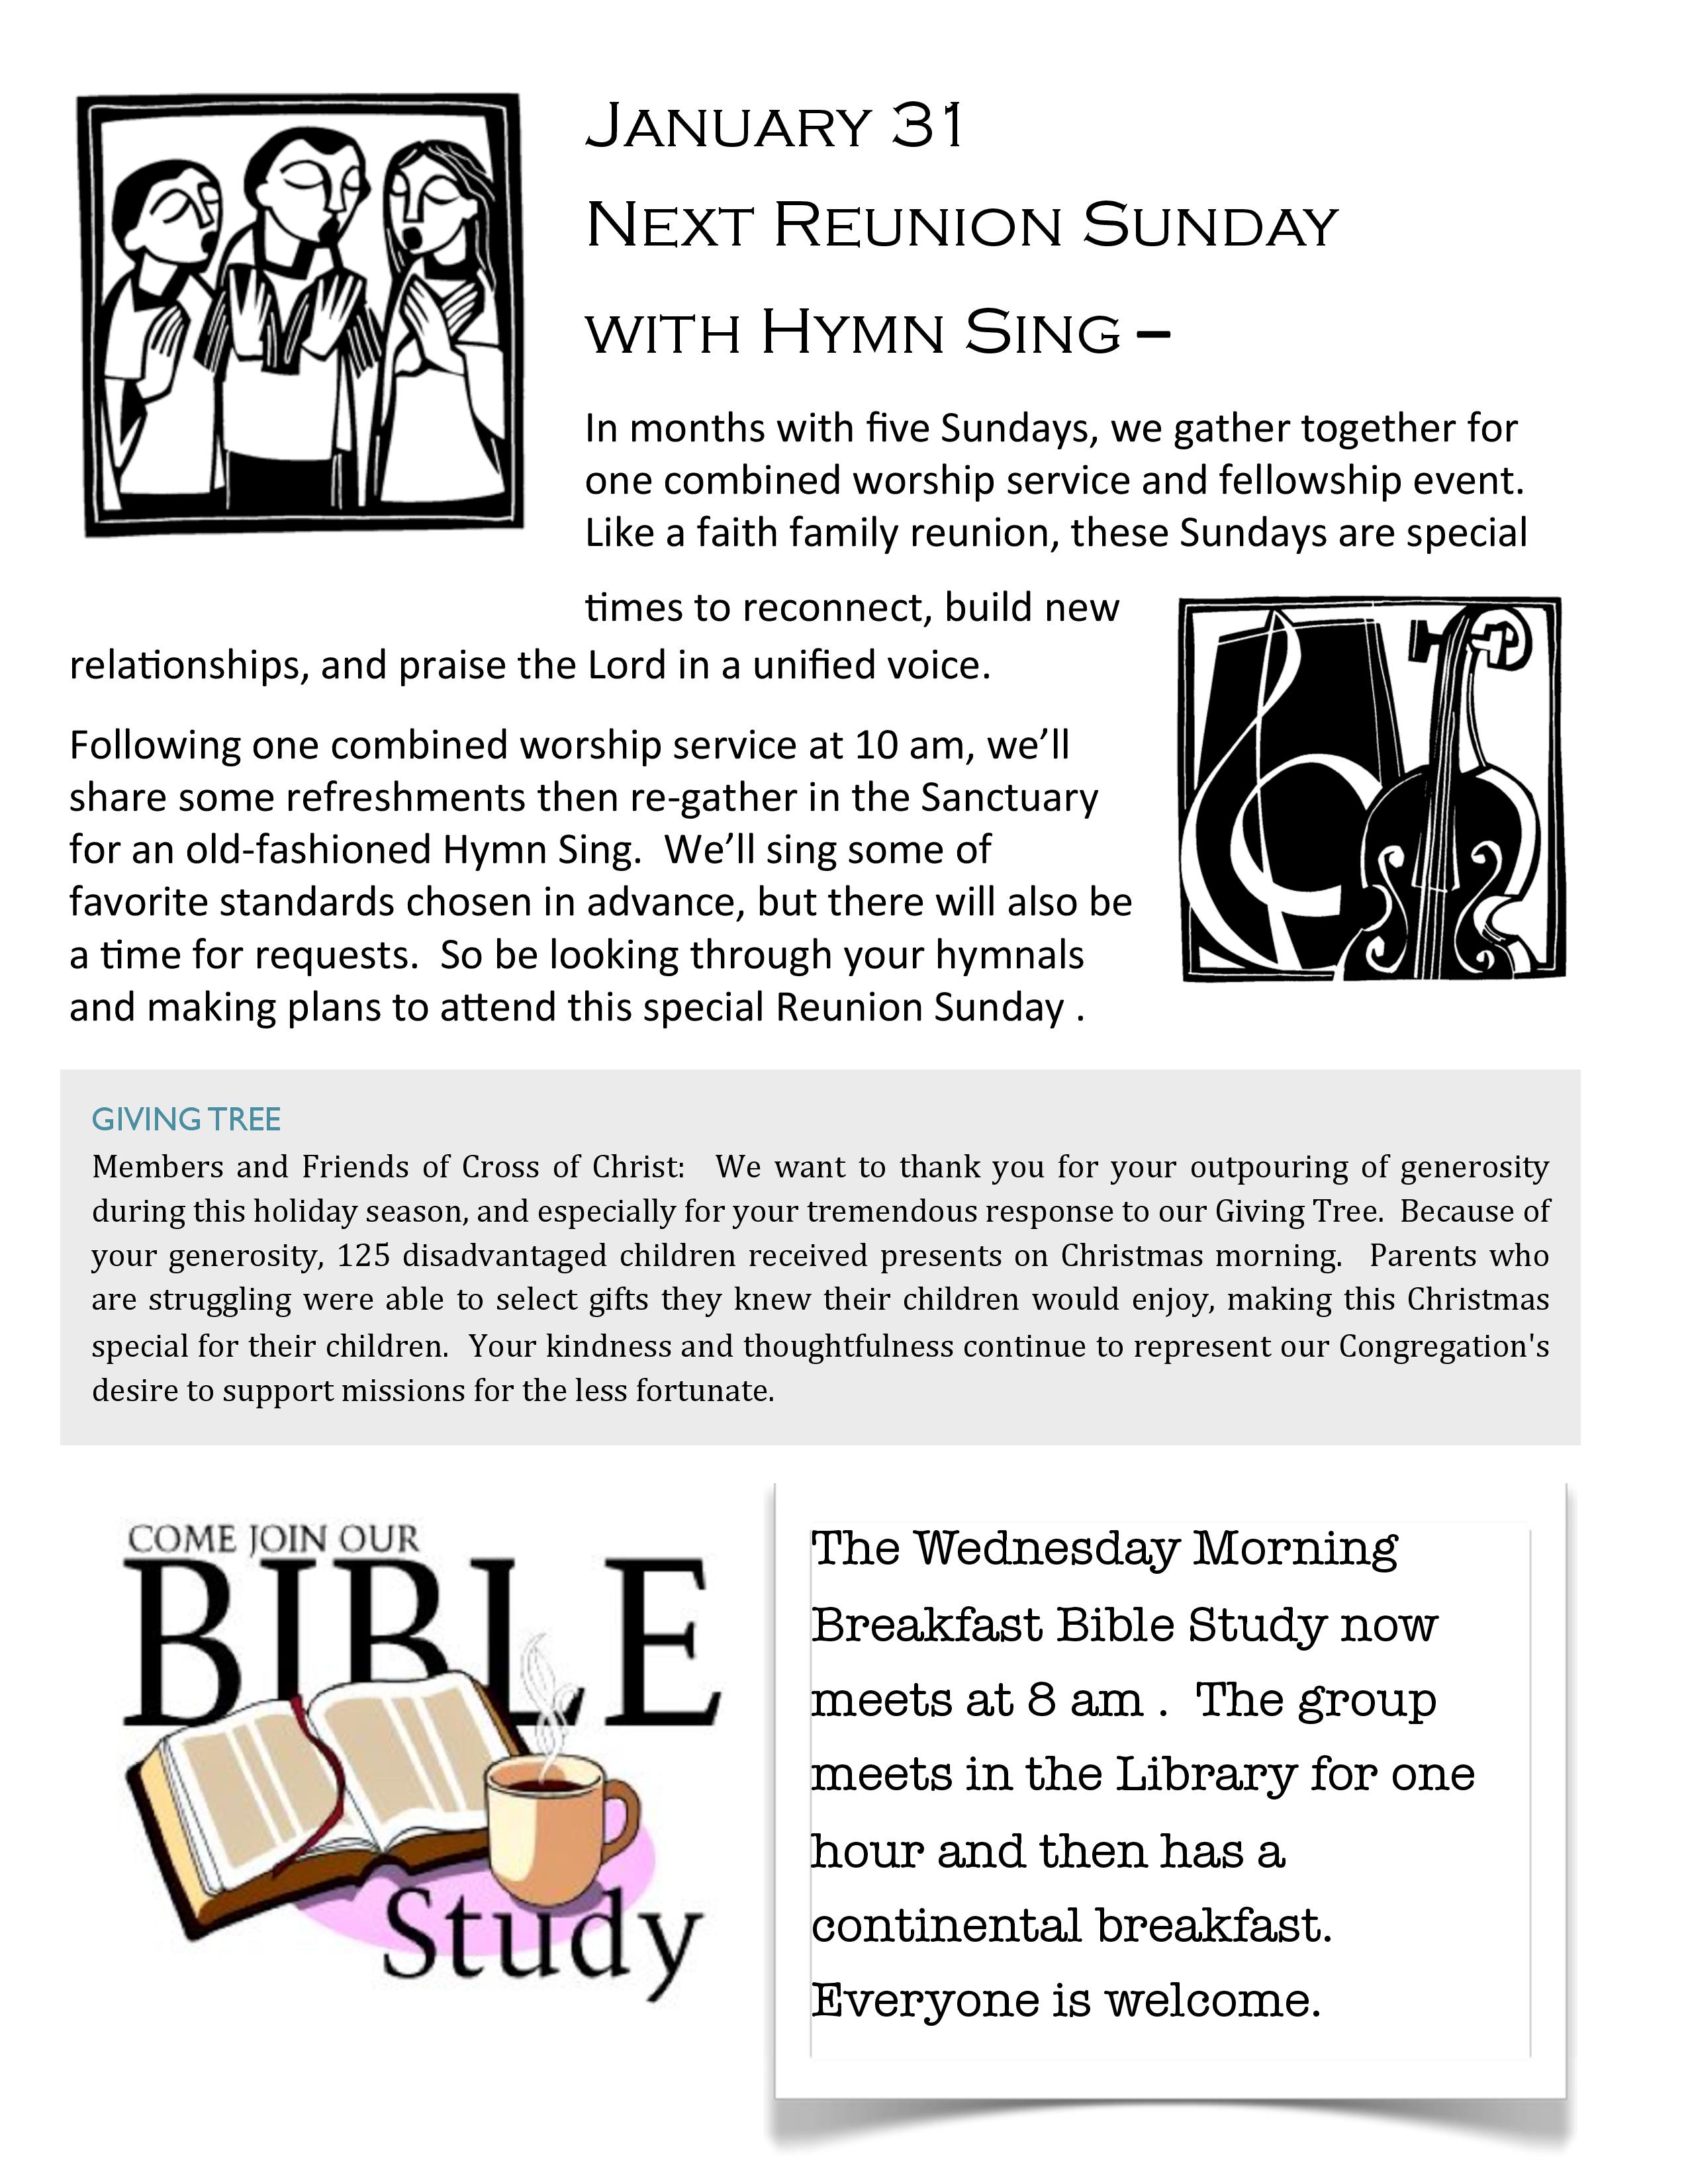 January 31 Next Reunion Sunday with Hymn Sing – In months with five Sundays, we gather together for one combined worship service and fellowship event. Like a faith family reunion, these Sundays are special >mes to reconnect, build new rela>onships, and praise the Lord in a unified voice. Following one combined worship service at 10 am, we’ll share some refreshments then re-­‐gather in the Sanctuary for an old-­‐fashioned Hymn Sing. We’ll sing some of favorite standards chosen in advance, but there will also be a >me for requests. So be looking through your hymnals and making plans to aGend this special Reunion Sunday .